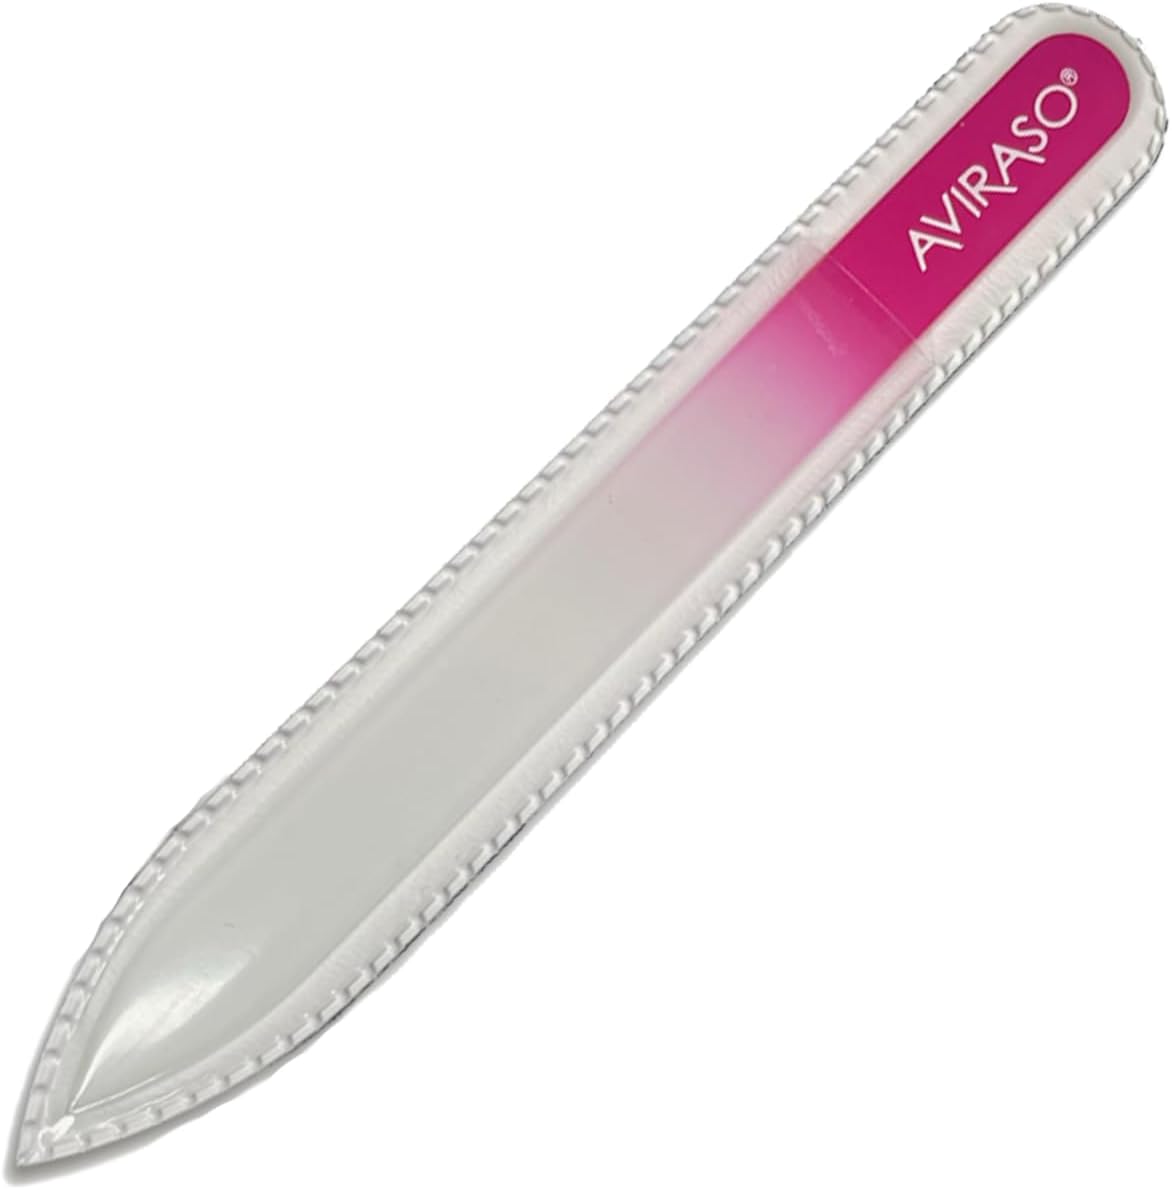 AVIRASO Original Premium Bohemia Crystal Glass Nail File on Both Sides with Protective Cover for All Nails - 14 cm - Manicure - Gentle Precision Files - Glass File Smooths and Protects Nails (Pink)